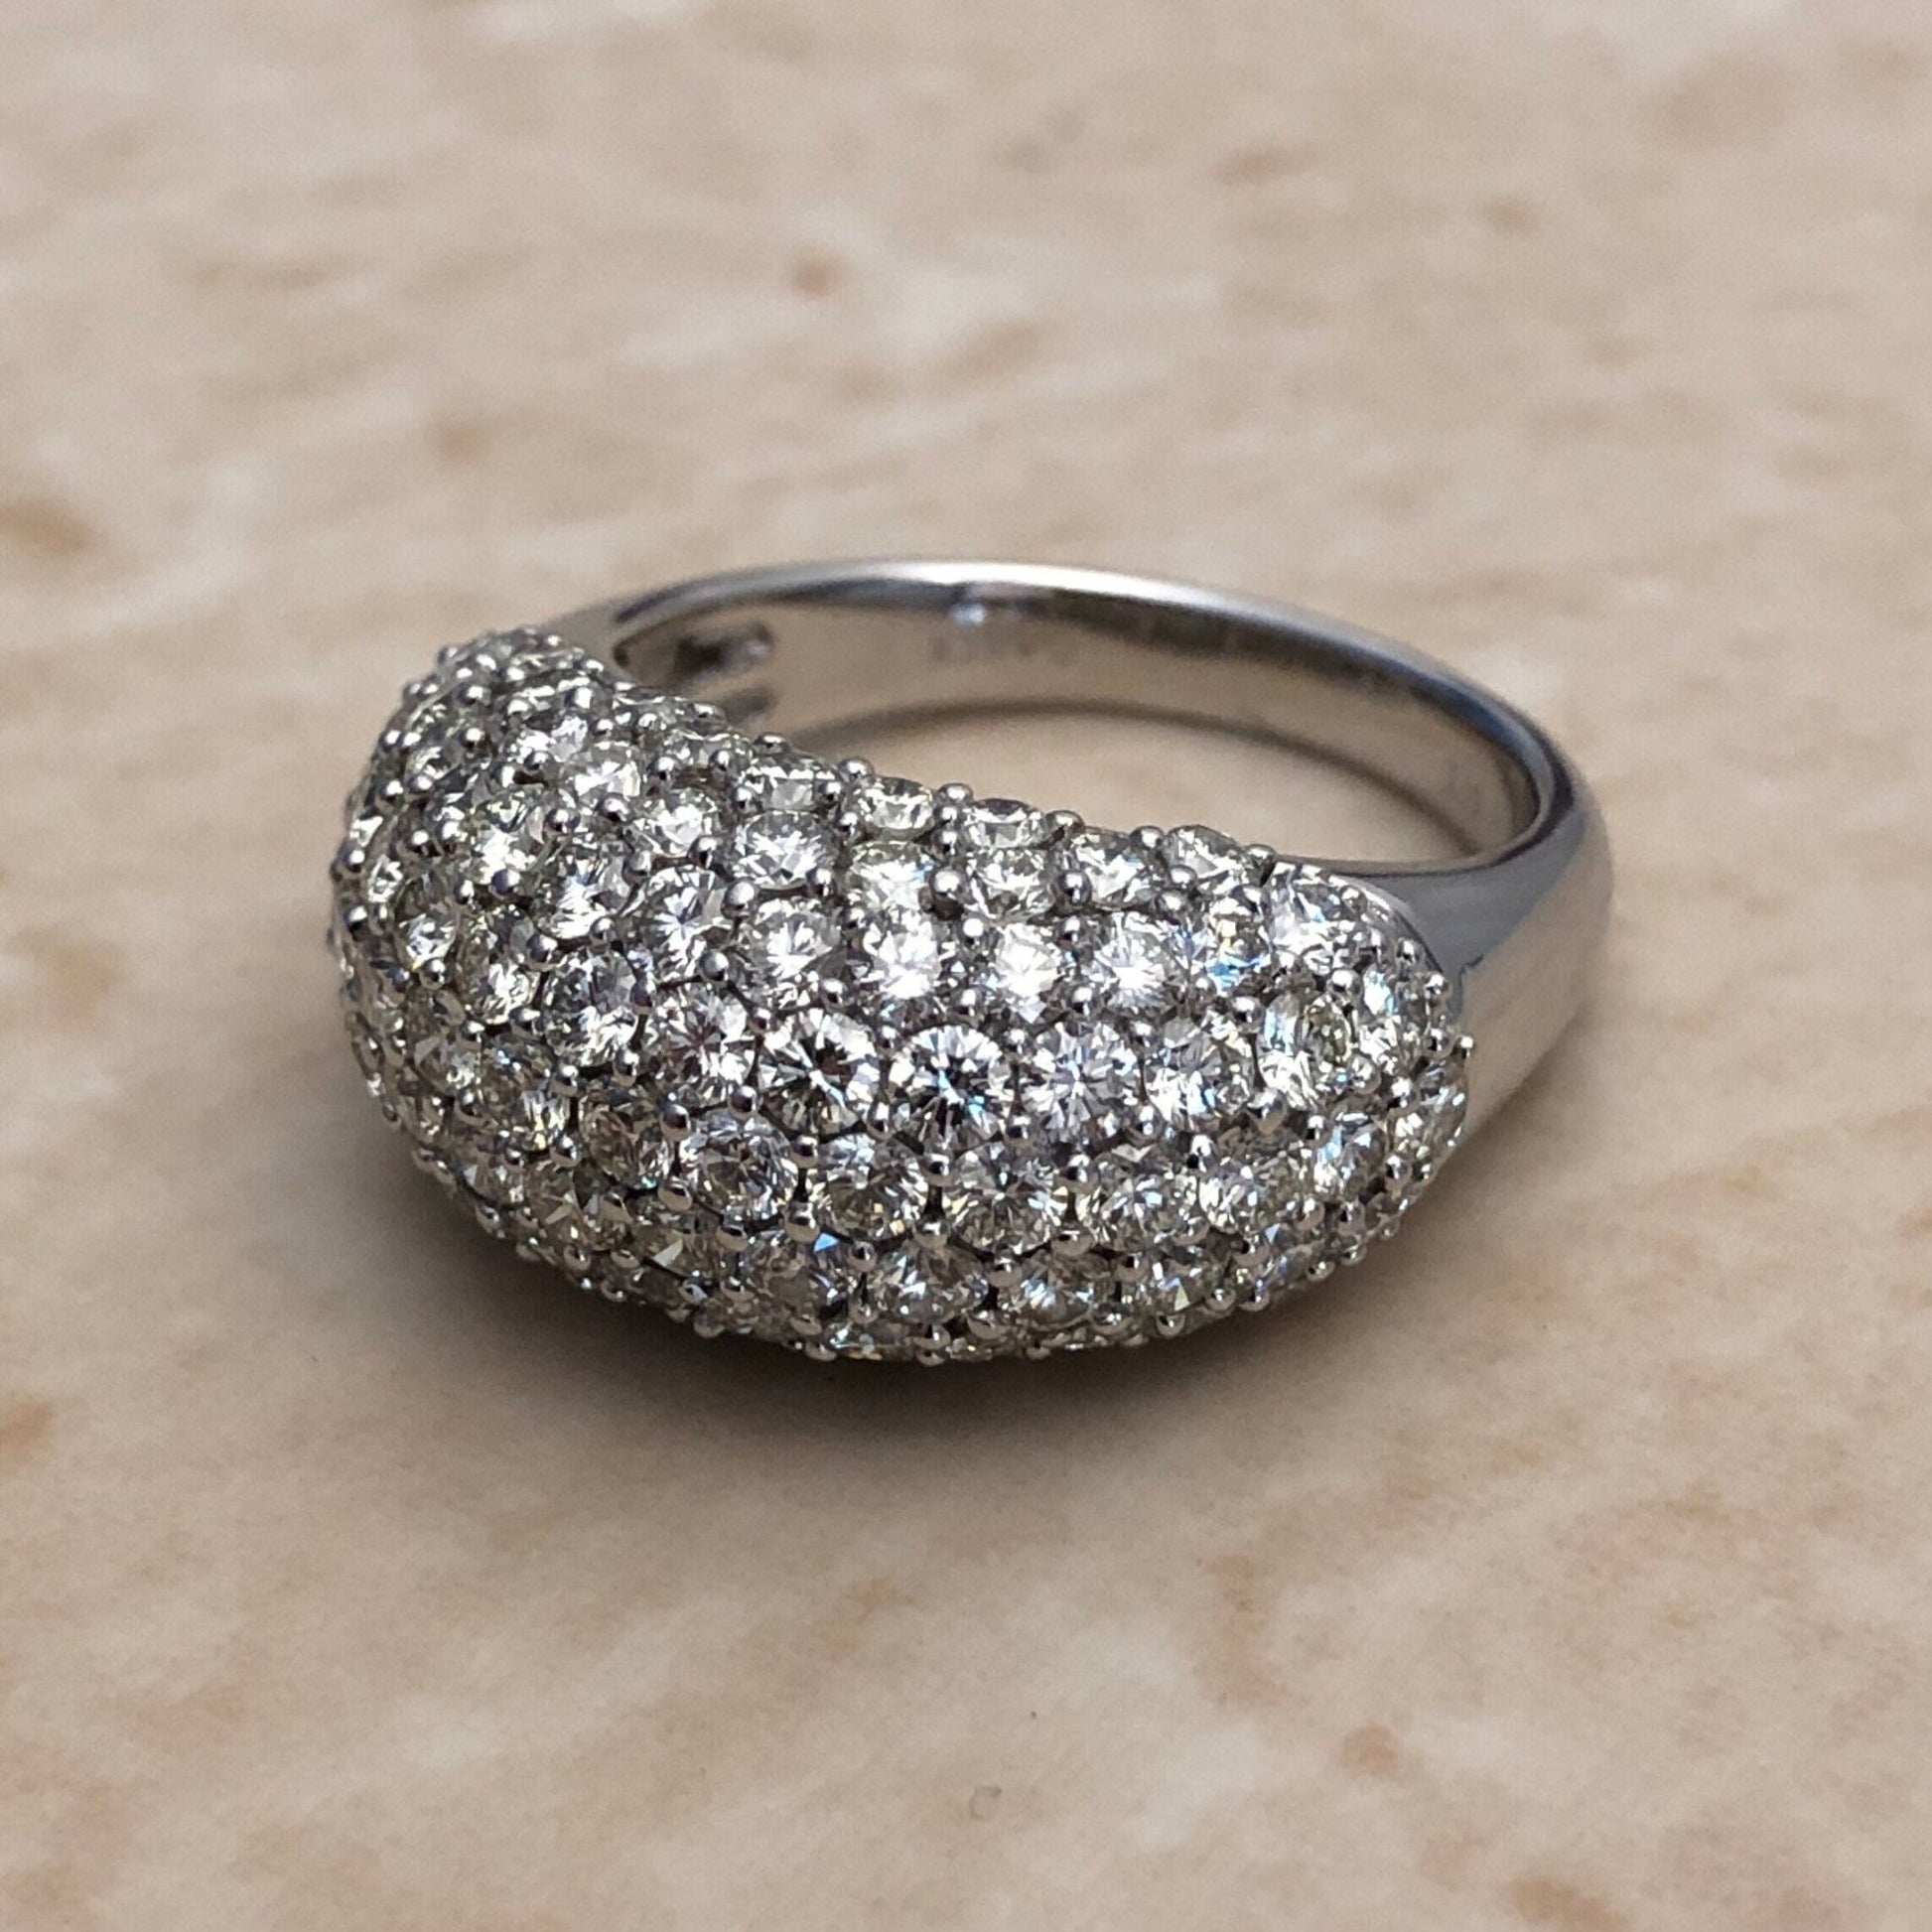 Fine Pave Diamond Dome Ring 3.19 CTTW - 18K White Gold - Diamond Cocktail Ring - Size 6.75 US